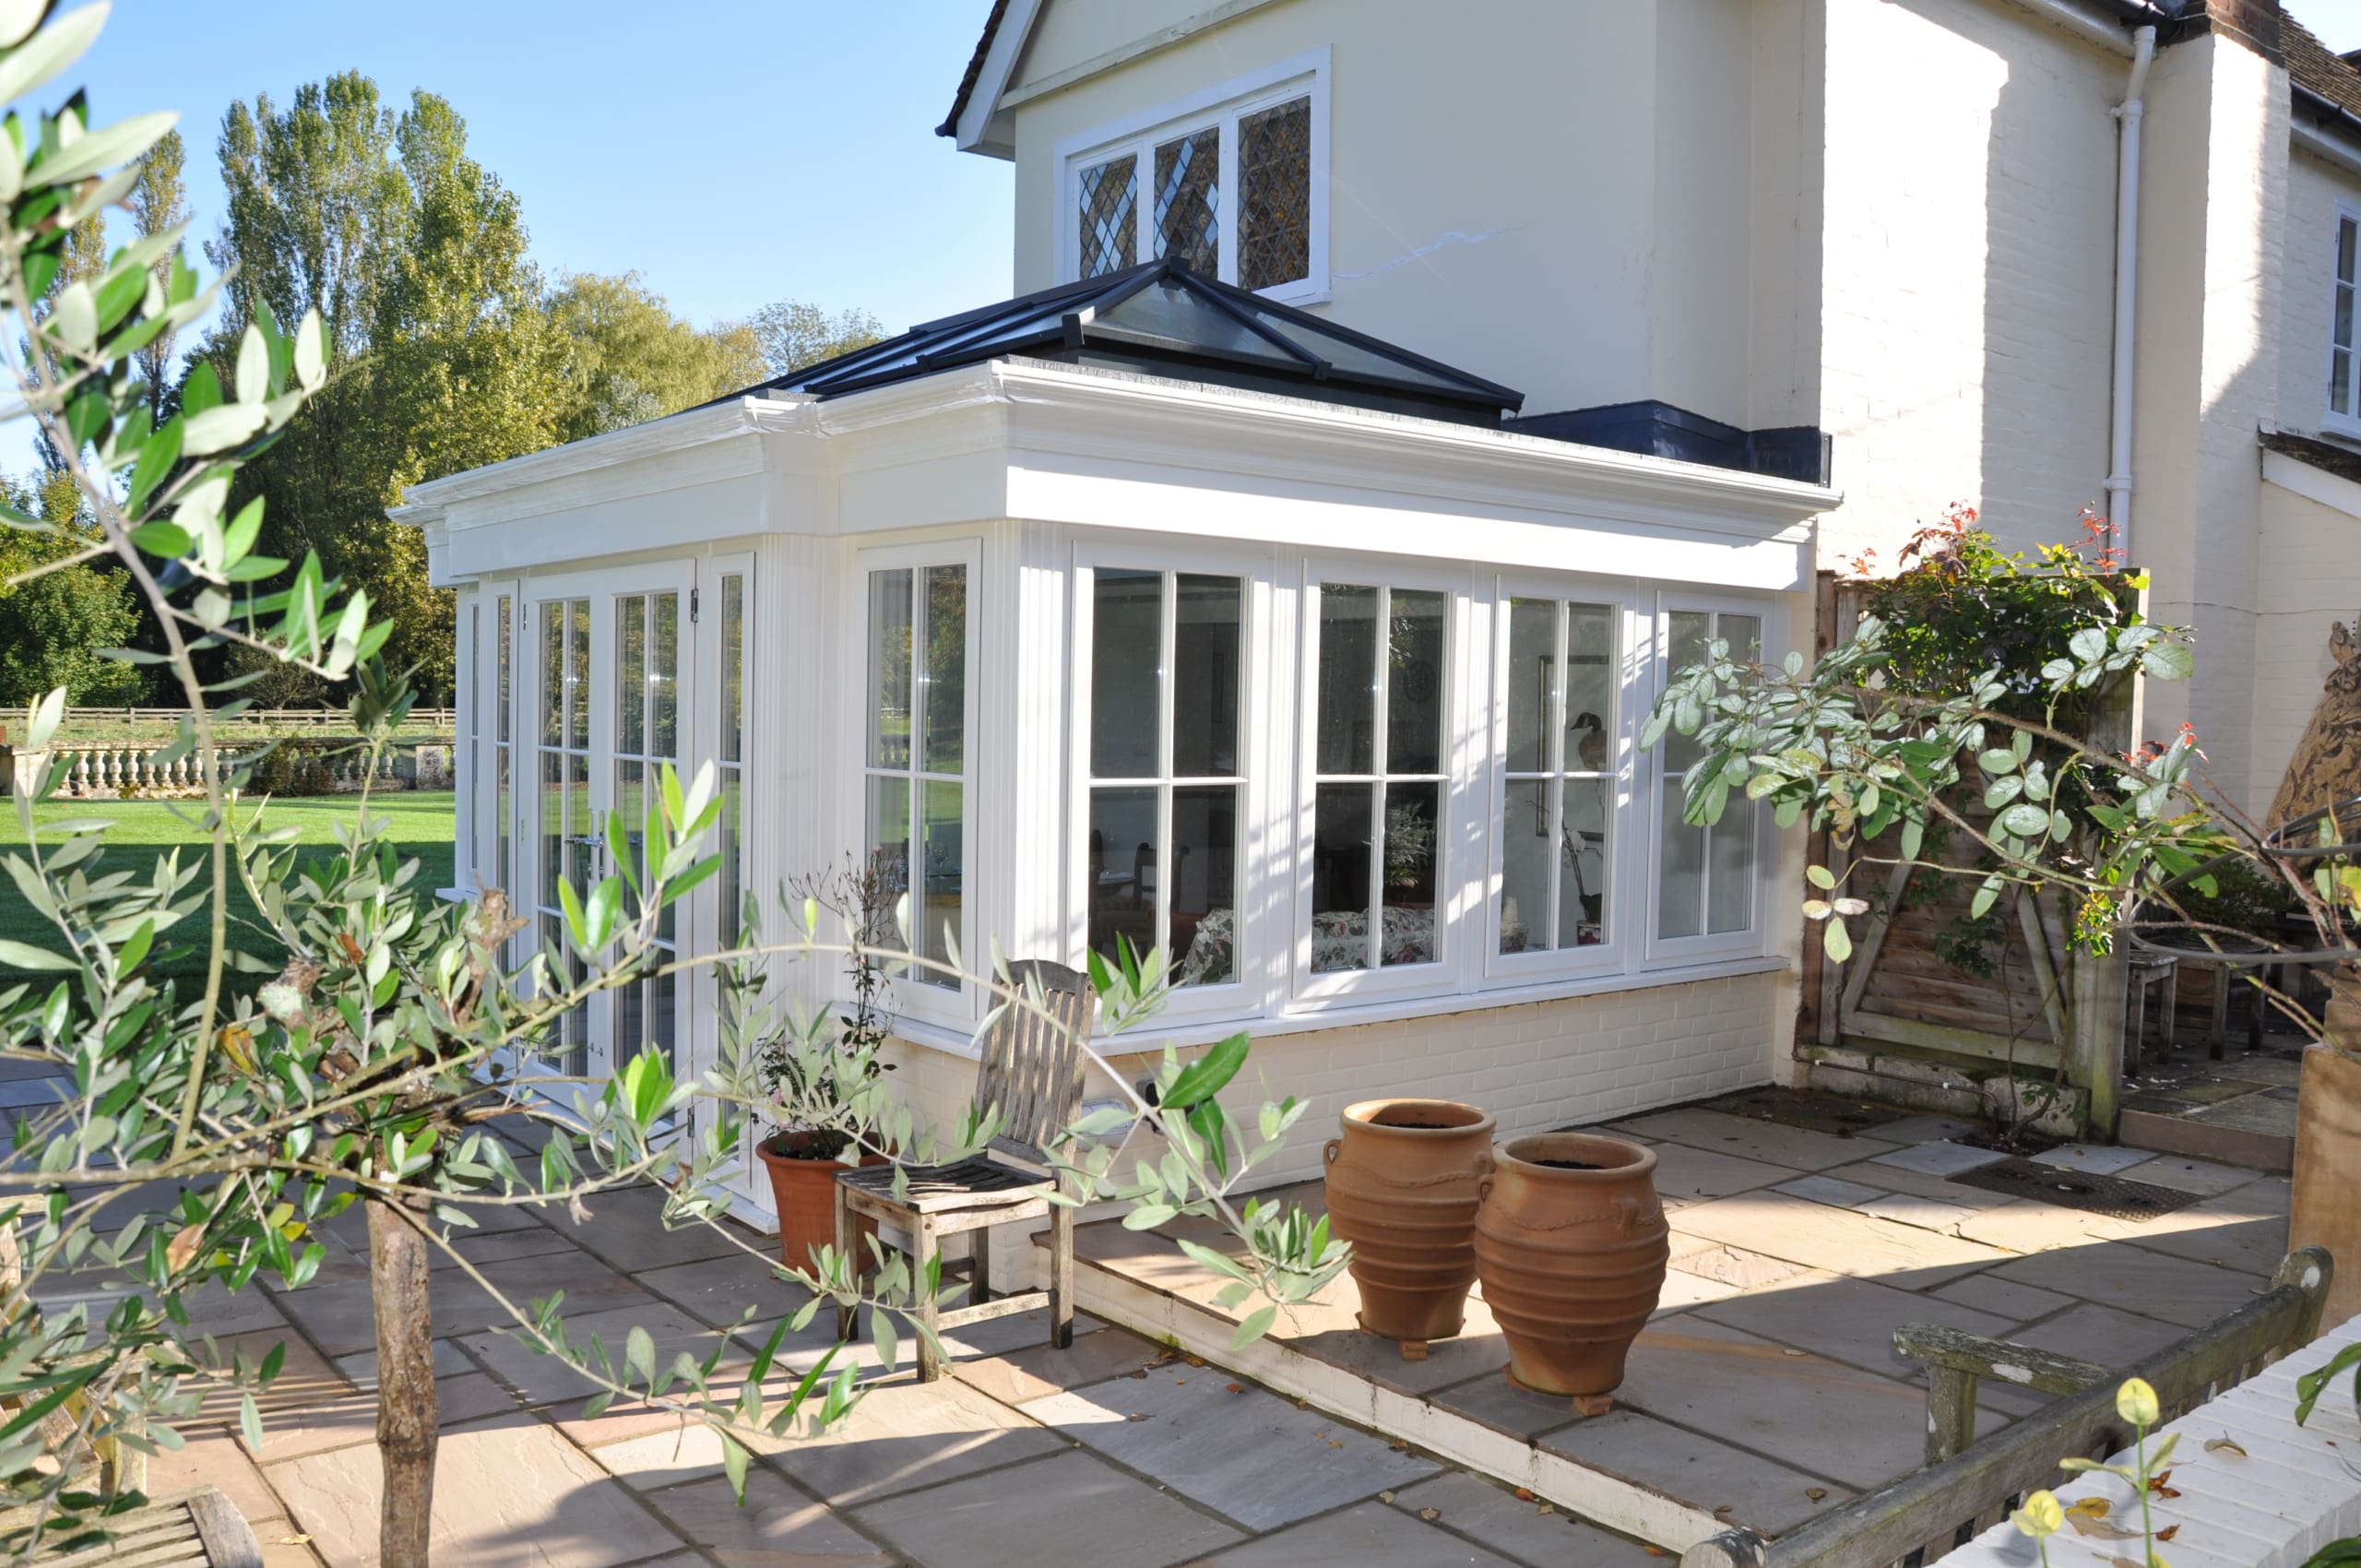 Exterior of a stunning orangery with roof lantern and mature garden plants.